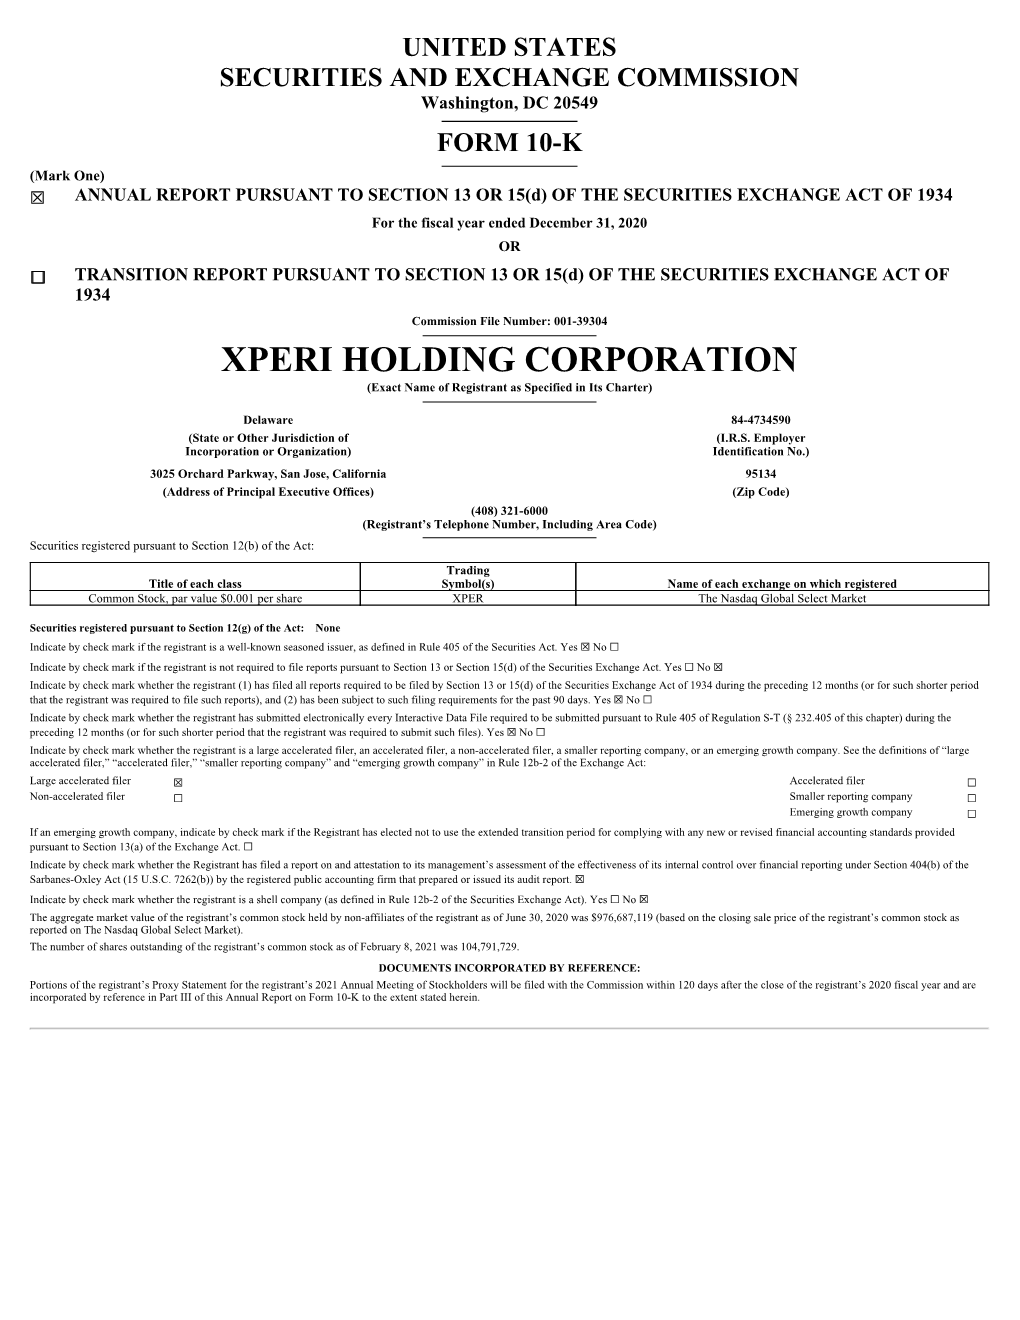 XPERI HOLDING CORPORATION (Exact Name of Registrant As Specified in Its Charter)